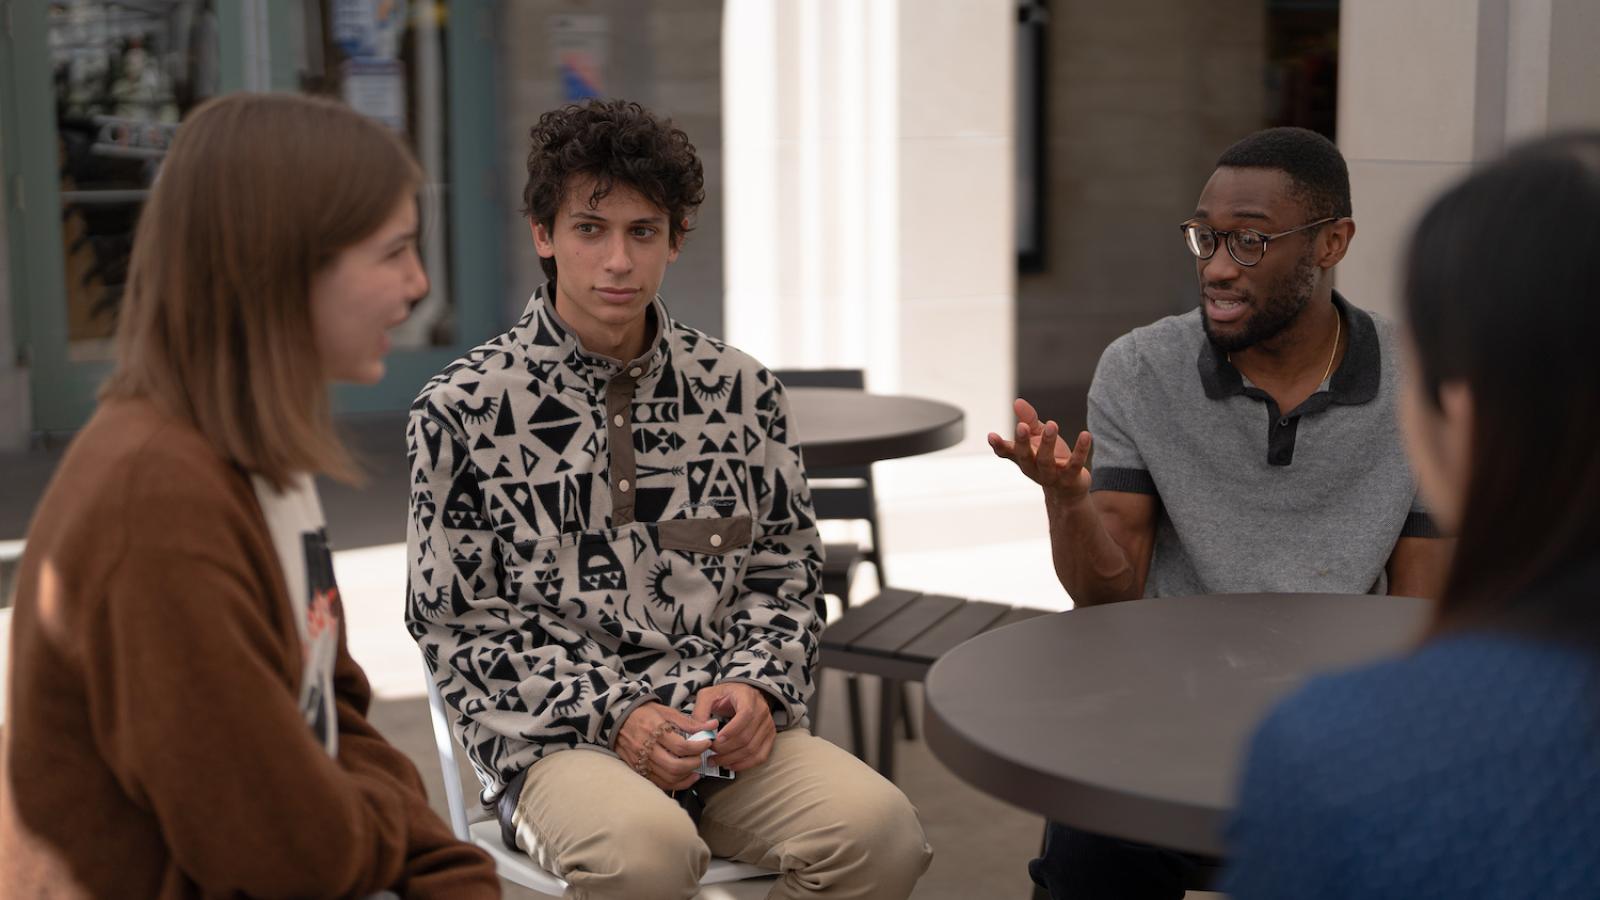 Musa Kamara '22, wearing glasses, leading discussion with group of speaking partners